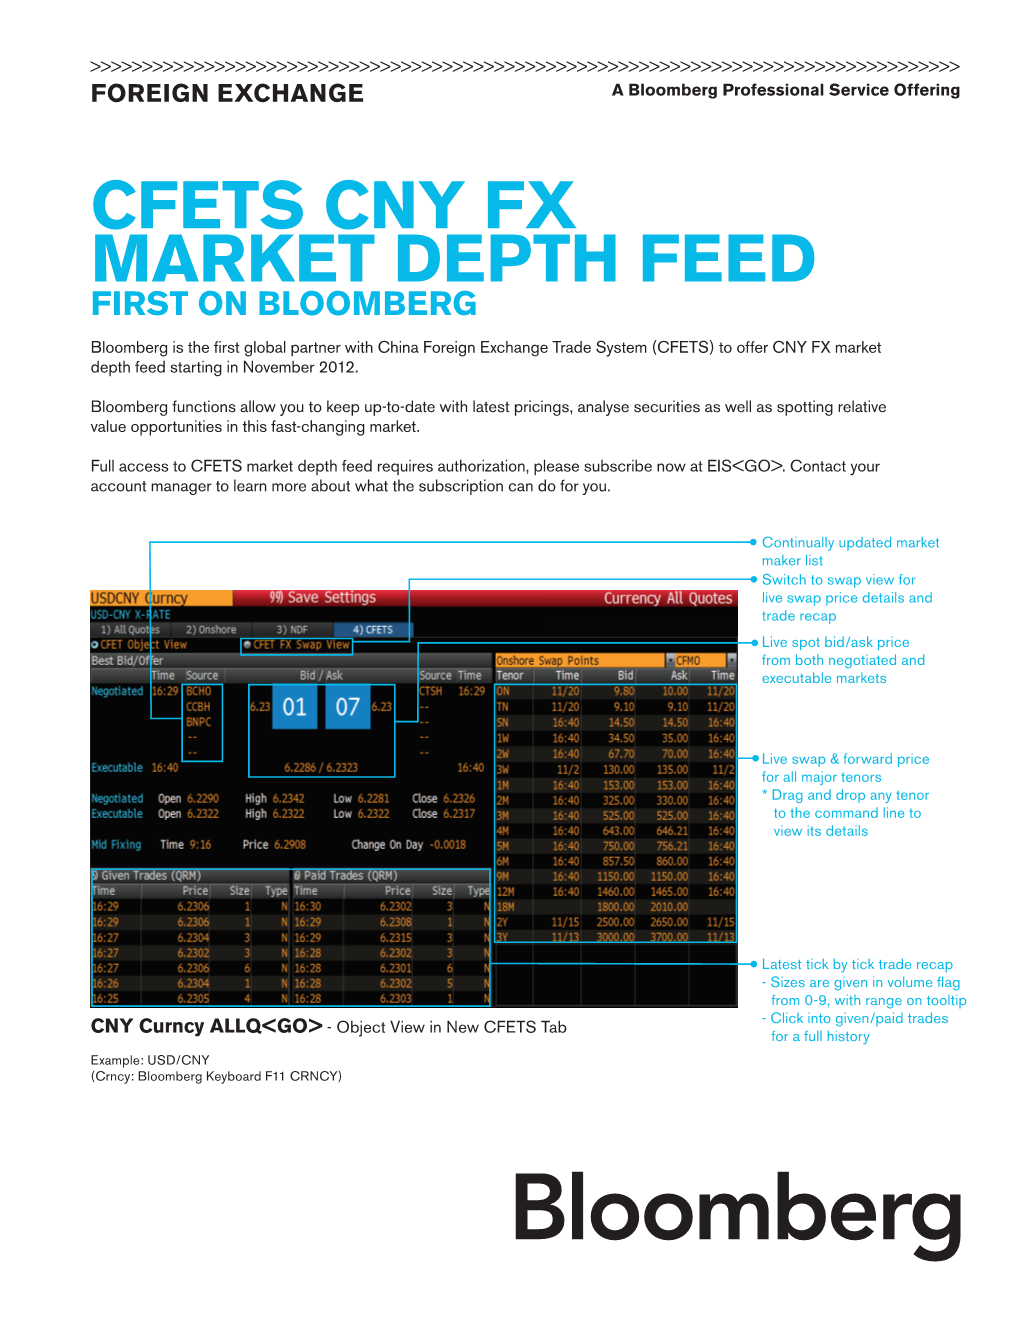 Cfets Cny Fx Market Depth Feed First on Bloomberg